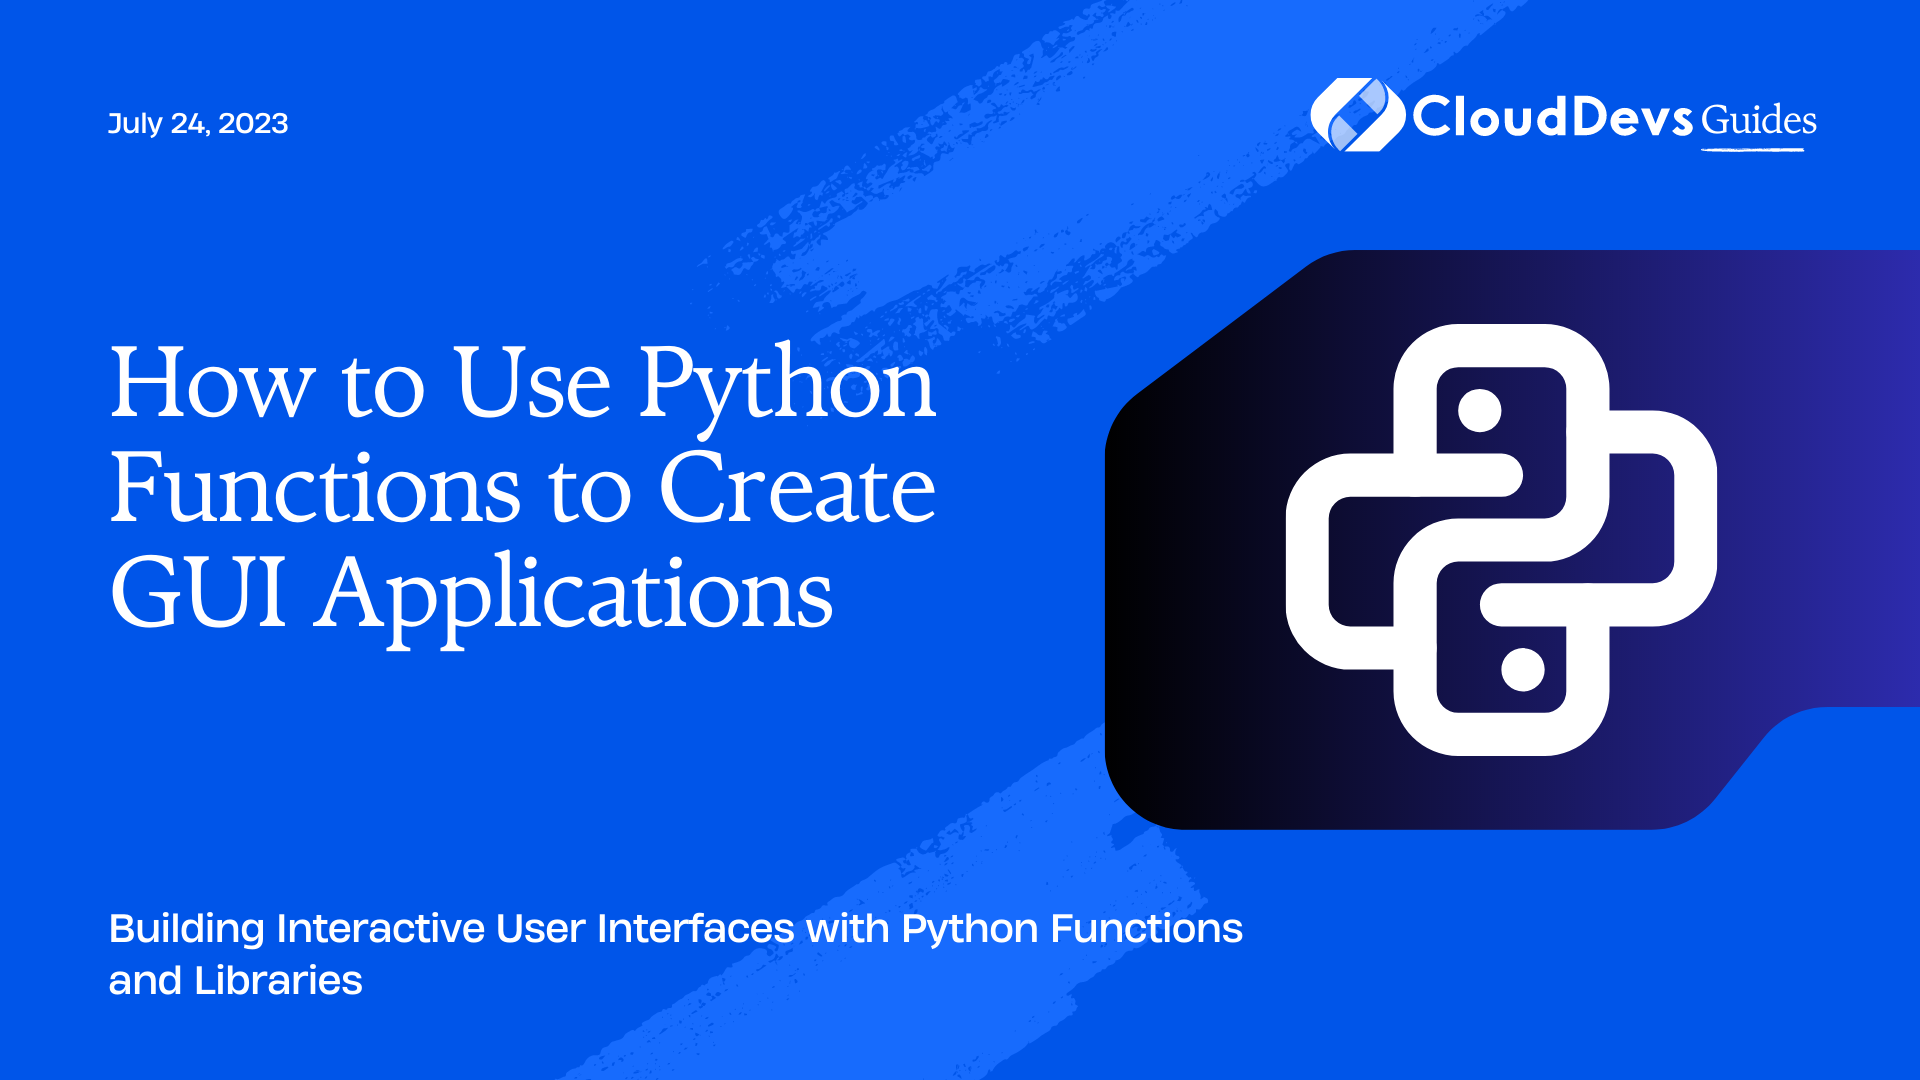 How to Use Python Functions to Create GUI Applications